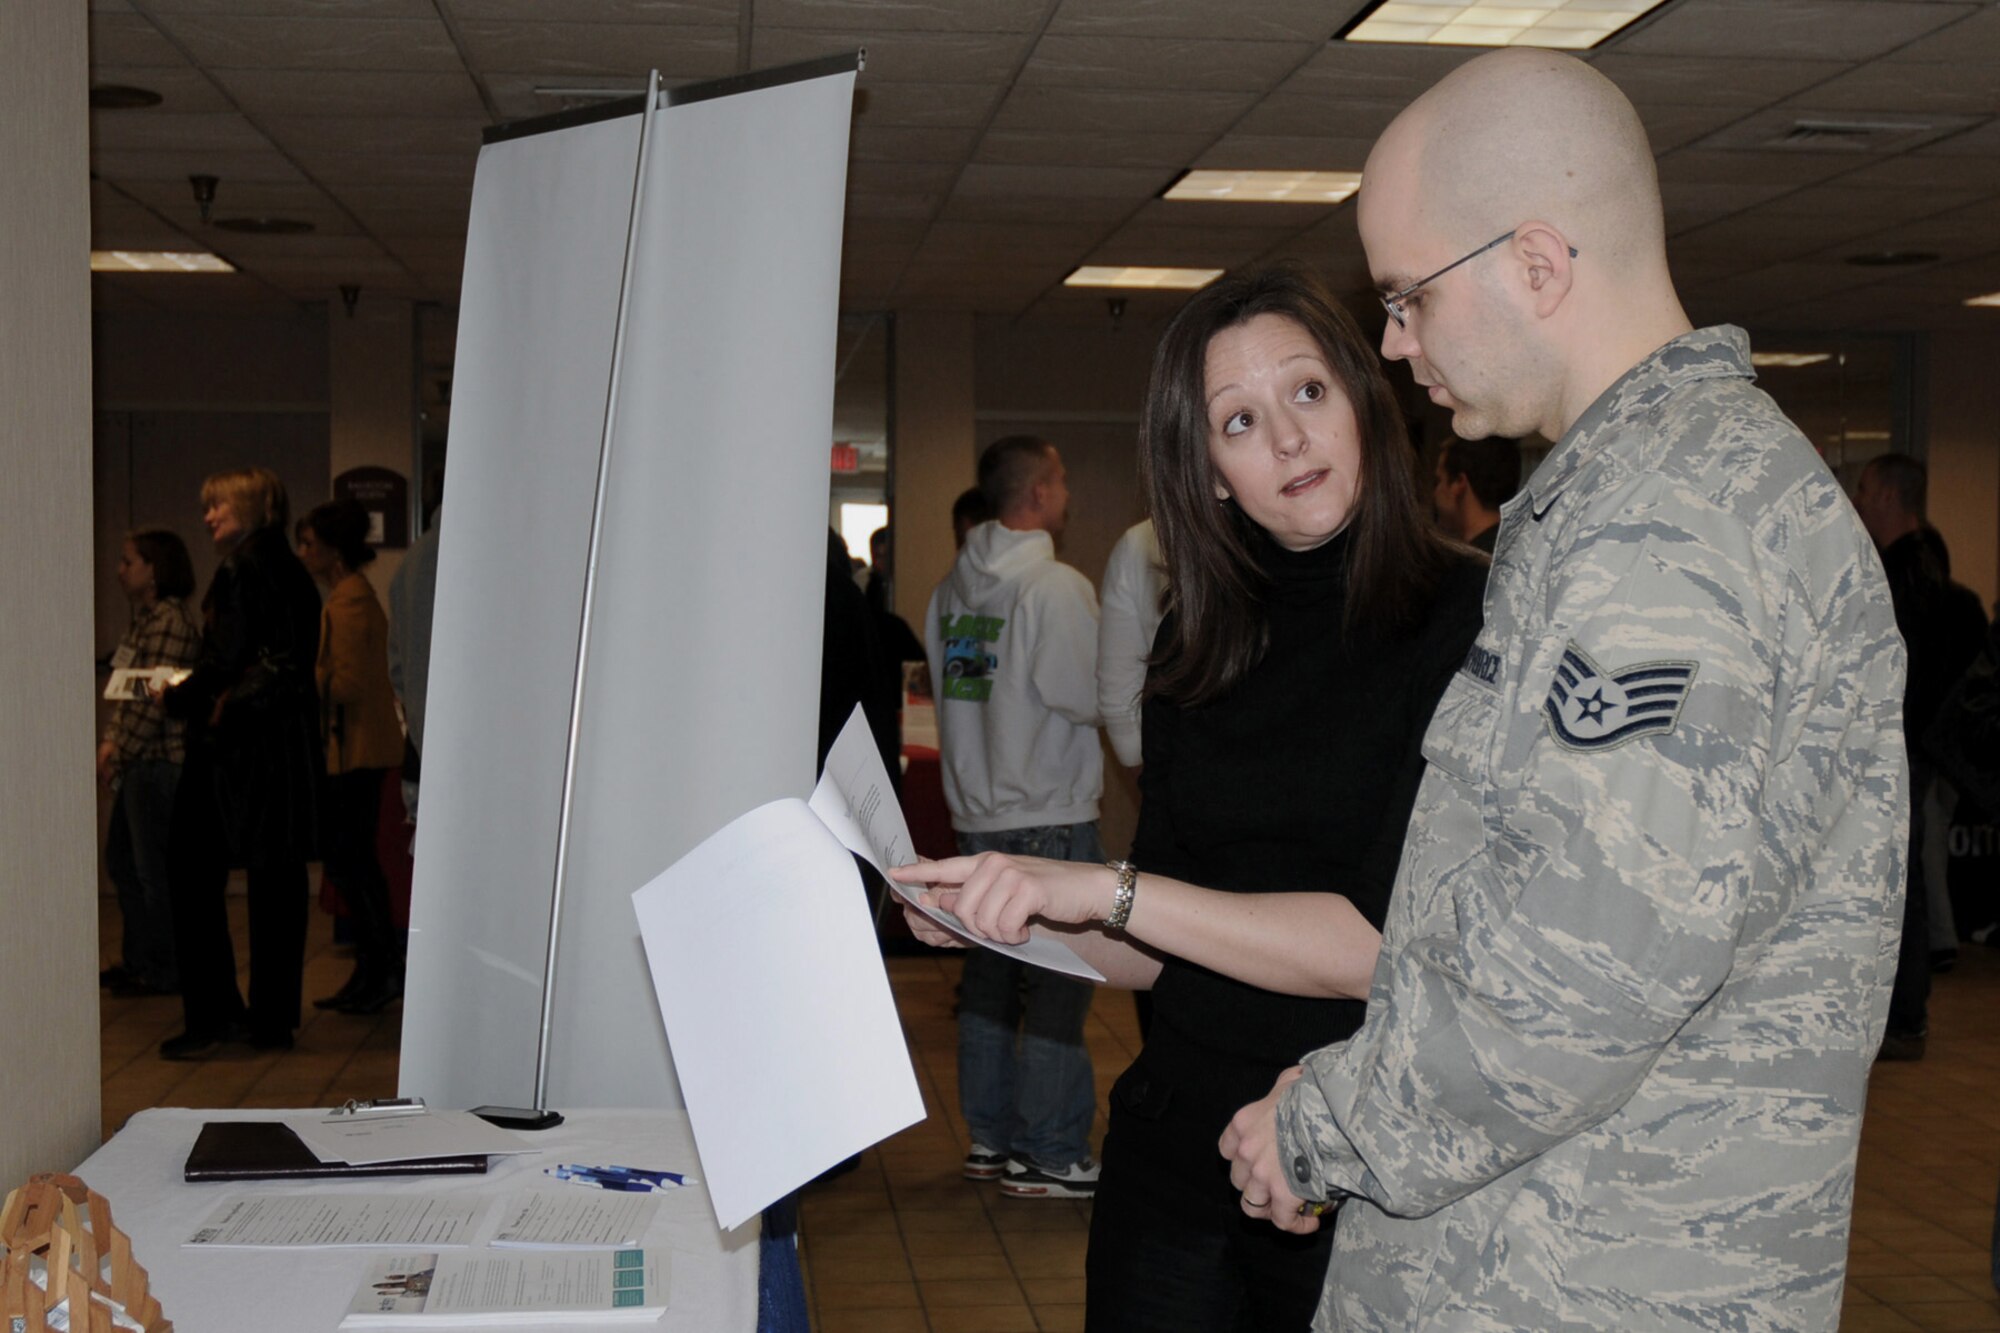 Staff Sgt. Taylor York (right) listens intently as Military Medicine (M2M) representative Heidi Carter (left) reviews information with him about what the M2M program has to offer.  Sgt. York recently returned from deployment and is attending the Yellow Ribbon Event being held at the Holiday Inn Airport in Des Moines, Iowa on March 6, 2010.  (US Air Force photo/Staff Sgt. Linda E. Kephart)(Released)